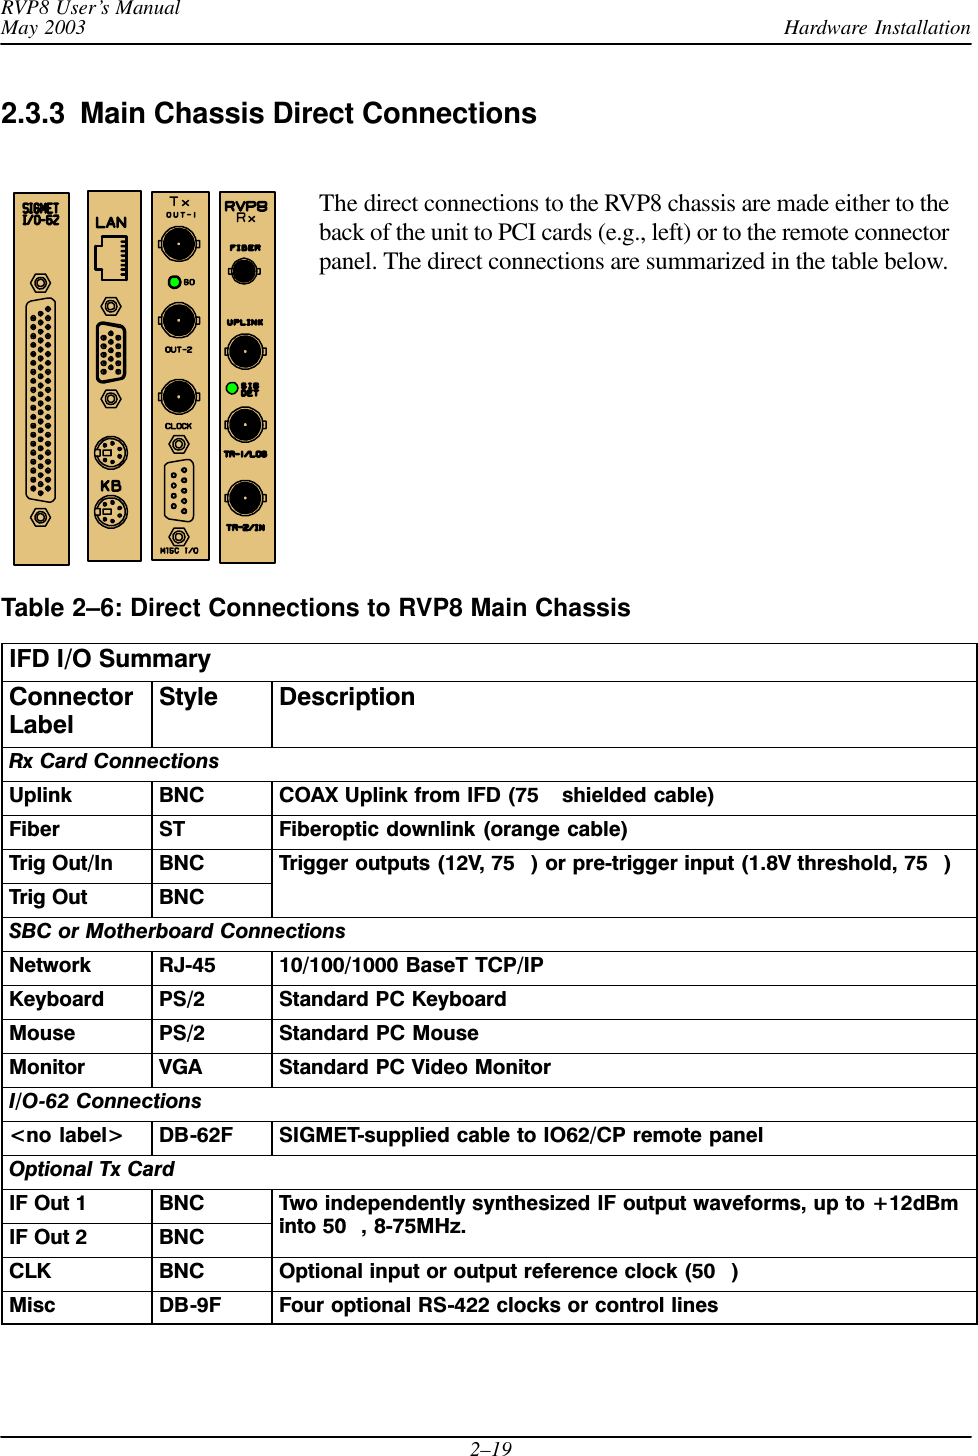 Hardware InstallationRVP8 User’s ManualMay 20032–192.3.3  Main Chassis Direct Connections The direct connections to the RVP8 chassis are made either to theback of the unit to PCI cards (e.g., left) or to the remote connectorpanel. The direct connections are summarized in the table below.Table 2–6: Direct Connections to RVP8 Main ChassisIFD I/O SummaryConnectorLabelStyle DescriptionRx Card ConnectionsUplink BNC COAX Uplink from IFD (75  shielded cable)Fiber ST Fiberoptic downlink (orange cable)Trig Out/In BNC Trigger outputs (12V, 75 ) or preĆtrigger input (1.8V threshold, 75 )Trig Out BNCSBC or Motherboard ConnectionsNetwork RJĆ45 10/100/1000 BaseT TCP/IPKeyboard PS/2 Standard PC KeyboardMouse PS/2 Standard PC MouseMonitor VGA Standard PC Video MonitorI/OĆ62 Connections&lt;no label&gt; DBĆ62F SIGMETĆsupplied cable to IO62/CP remote panelOptional Tx CardIF Out 1 BNC Two independently synthesized IF output waveforms, up to +12dBminto 50 8 75MHzIF Out 2 BNC into 50 , 8Ć75MHz.CLK BNC Optional input or output reference clock (50 )Misc DBĆ9F Four optional RSĆ422 clocks or control lines